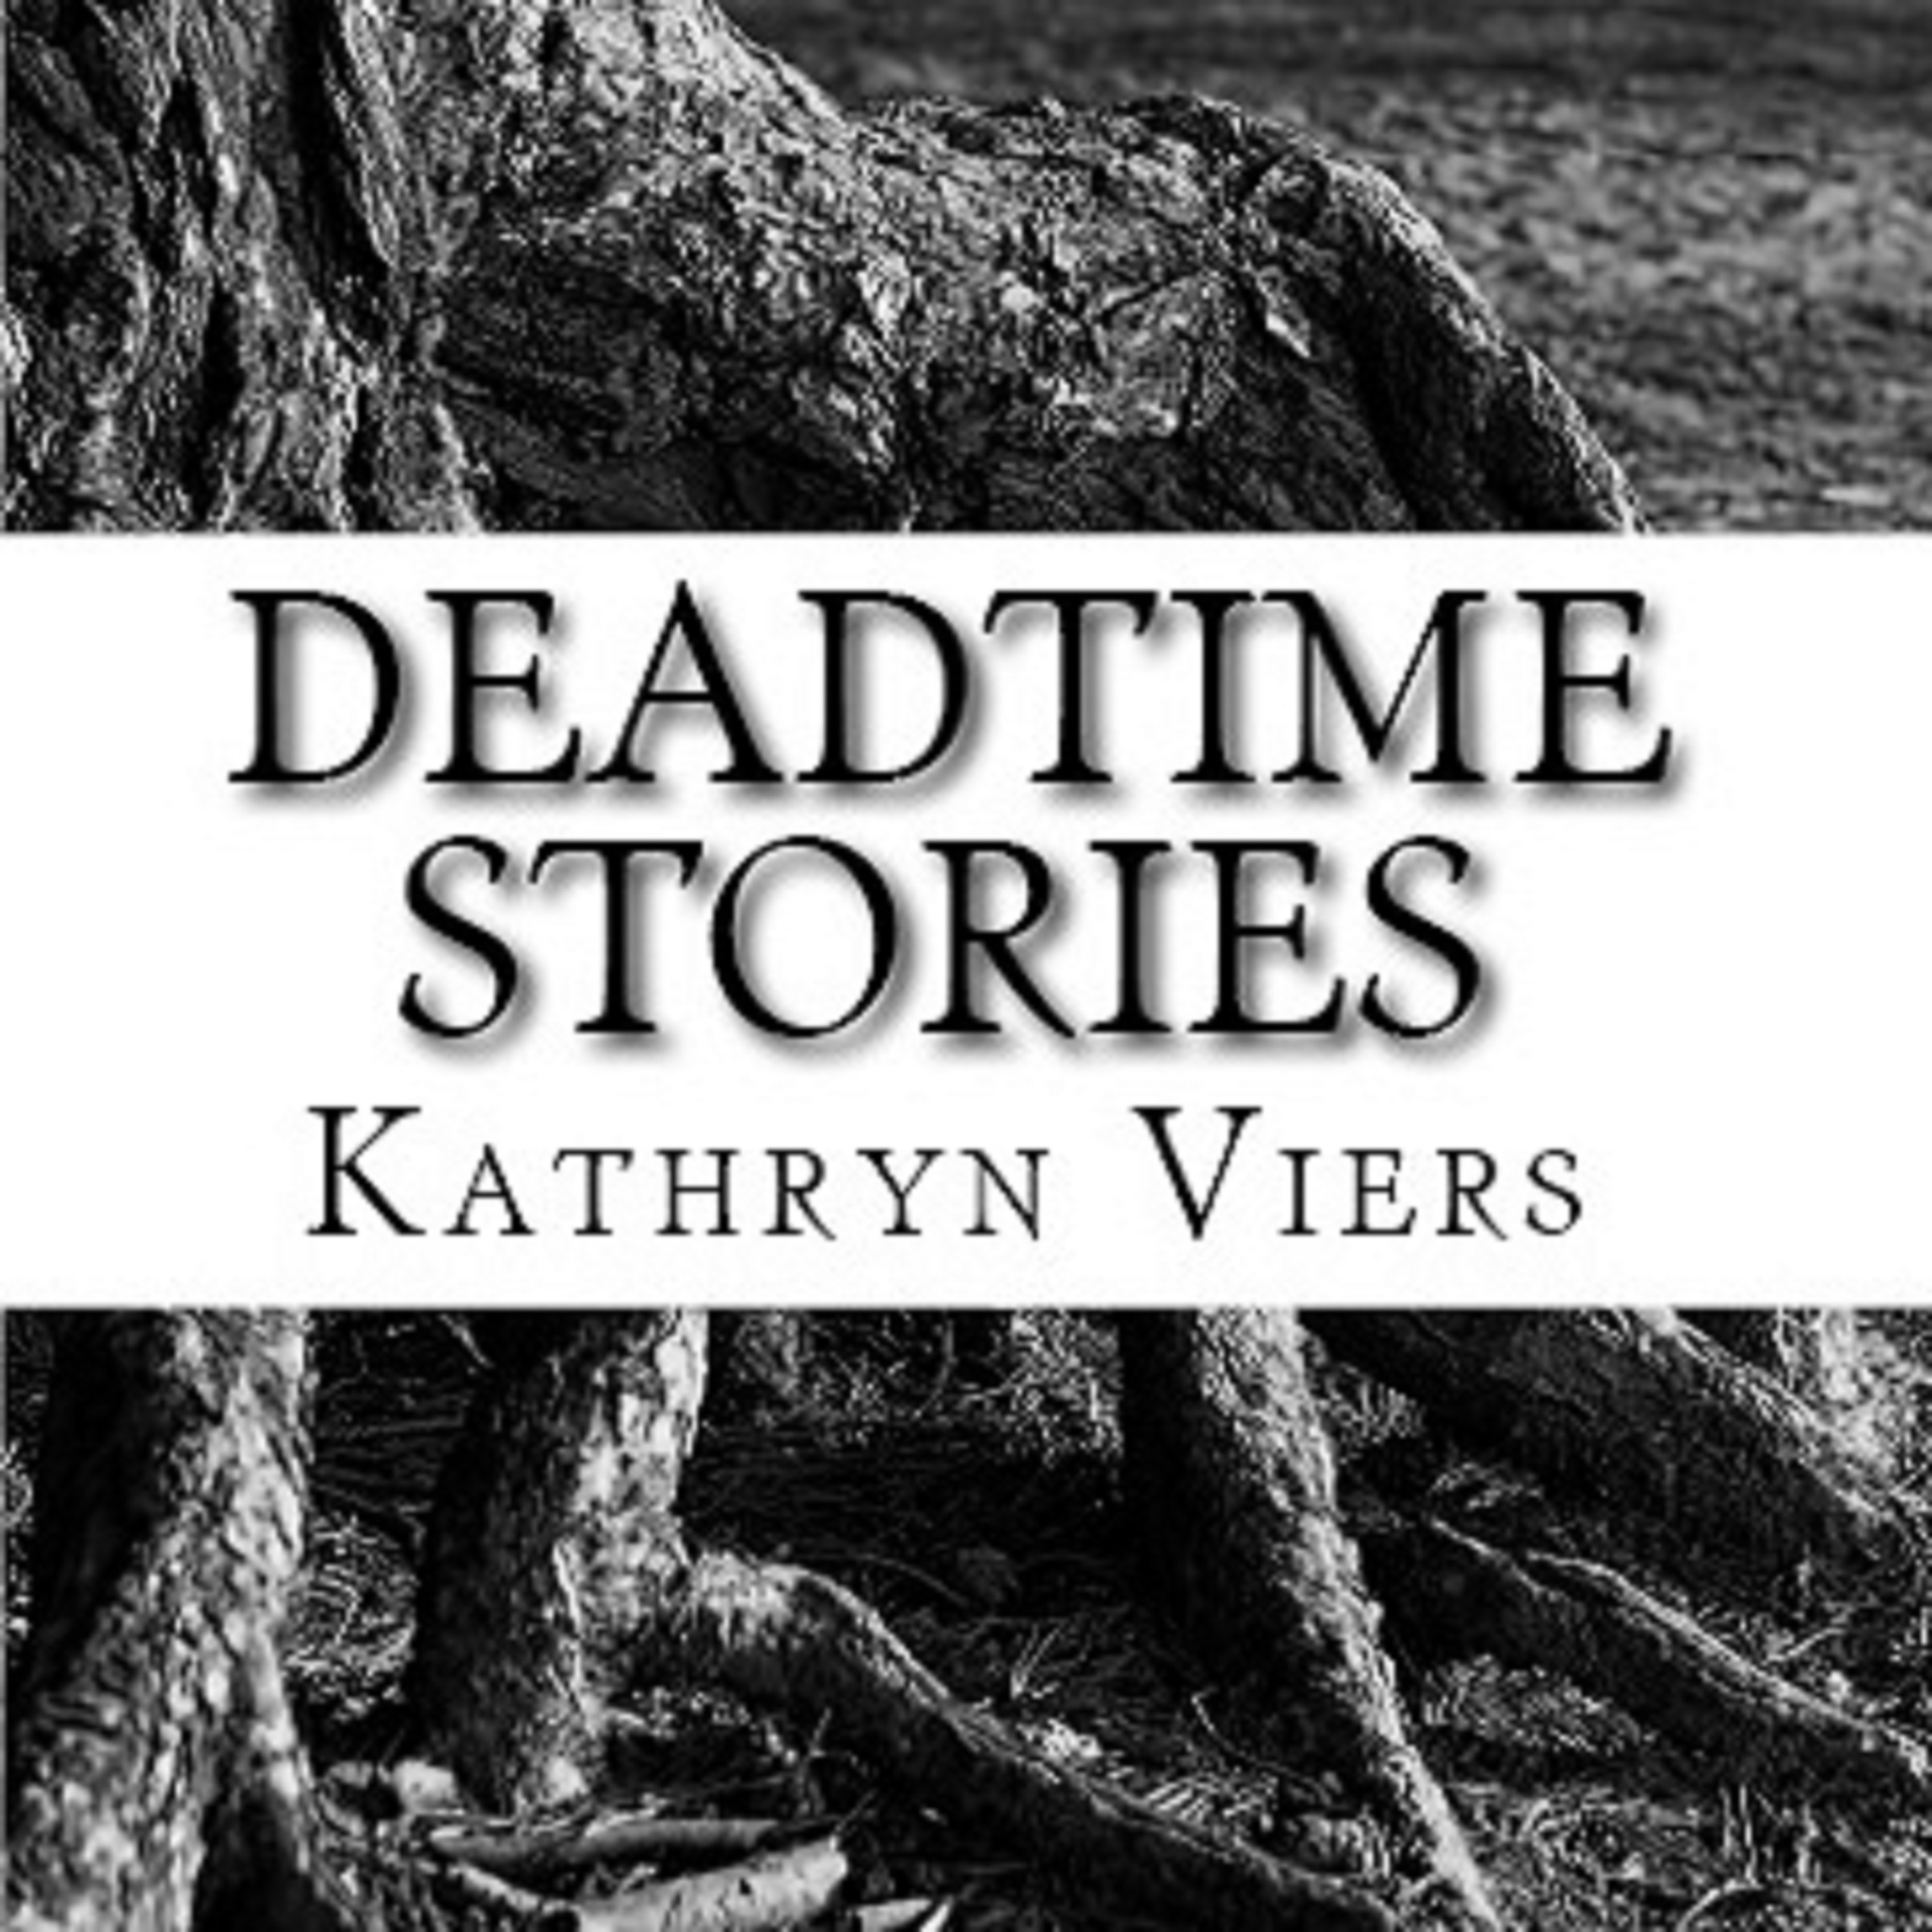 FREE: Deadtime Stories by Kathryn Viers